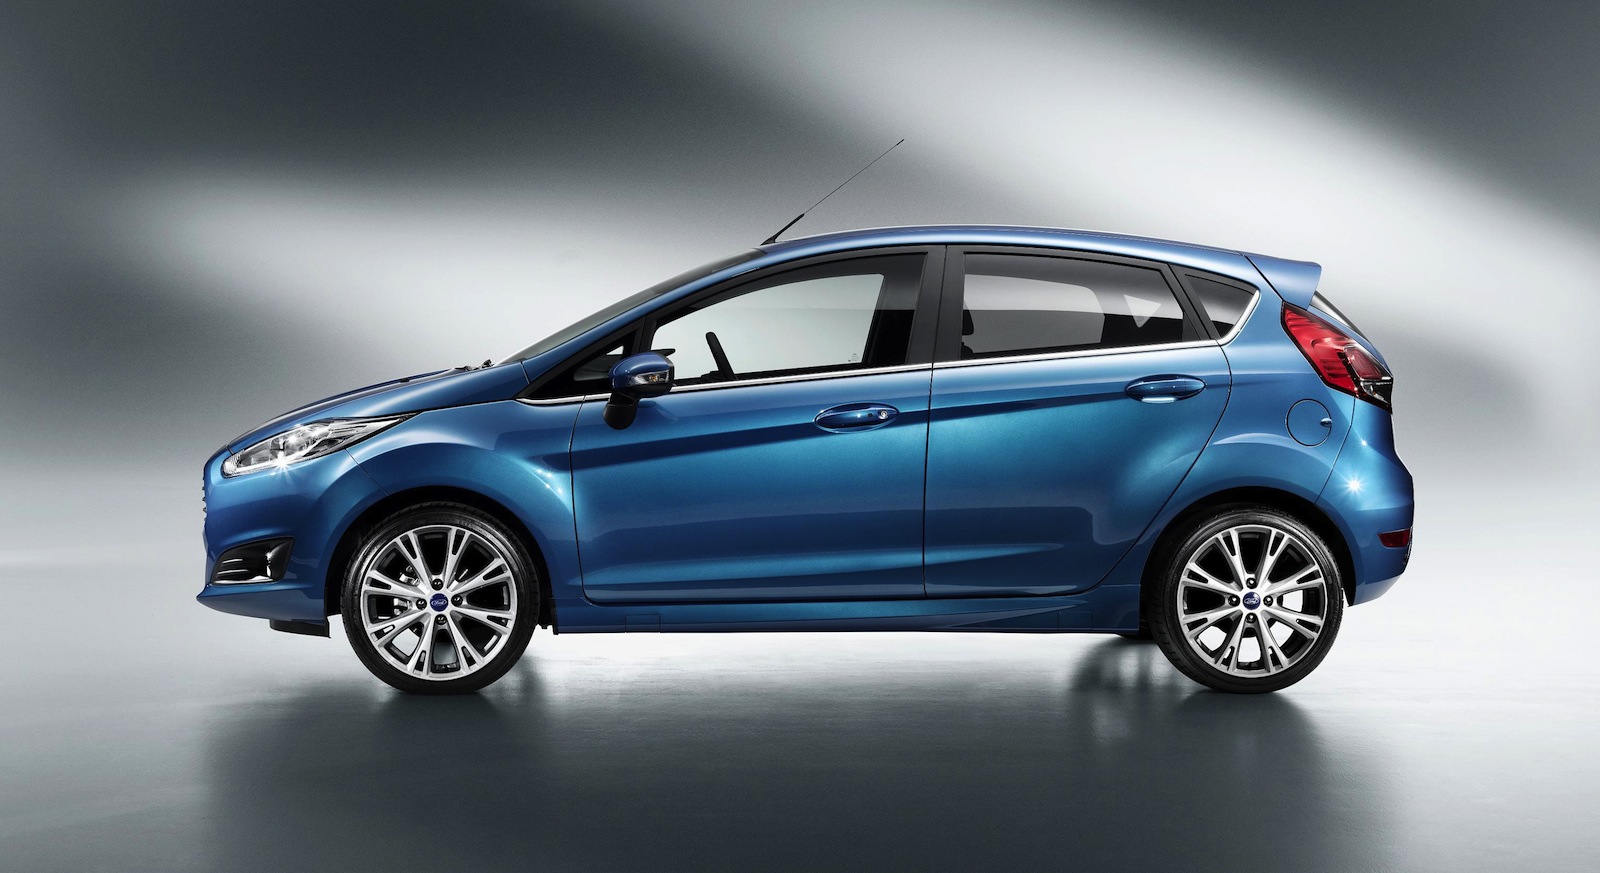 2013 Ford Fiesta: updated city car revealed - photos | CarAdvice